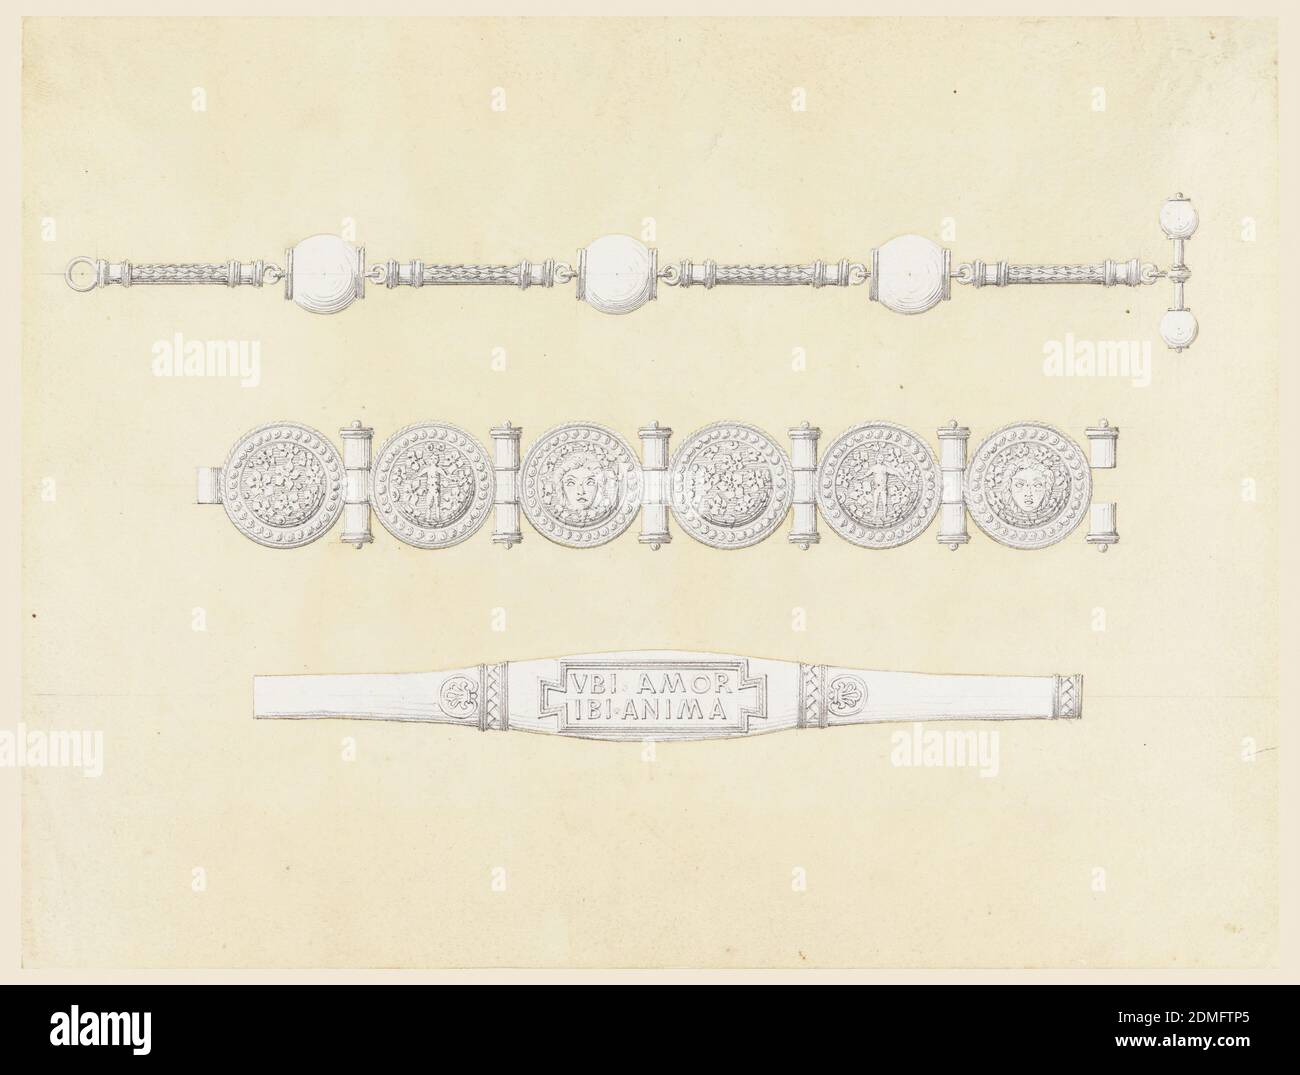 Design for a watch chain and two bracelets, Graphite, brush and pale yellow wash on white wove paper, Three jewelry designs, each below the other. The watch chain has three balls connected by thin pieces of chain. The first bracelet has six sheild-like disks connected by joints. The second bracelet has a center section inscribed 'VBI AMOR / IBI ANIMA.', Italy, ca. 1870, jewelry, Drawing Stock Photo